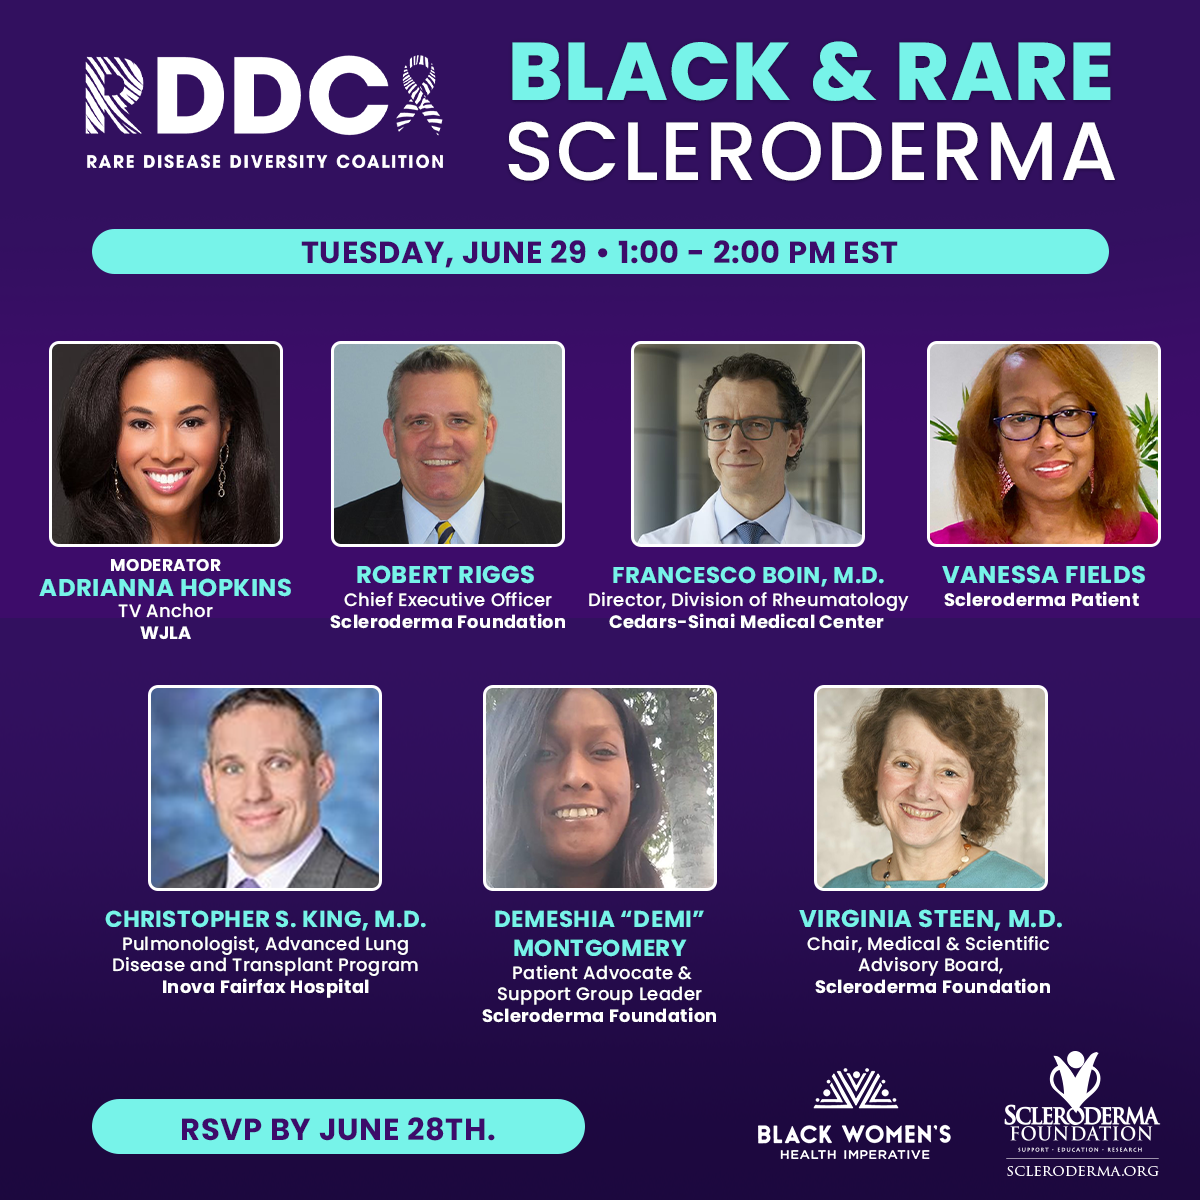 Black and Rare Scleroderma 2021 World Scleroderma Day